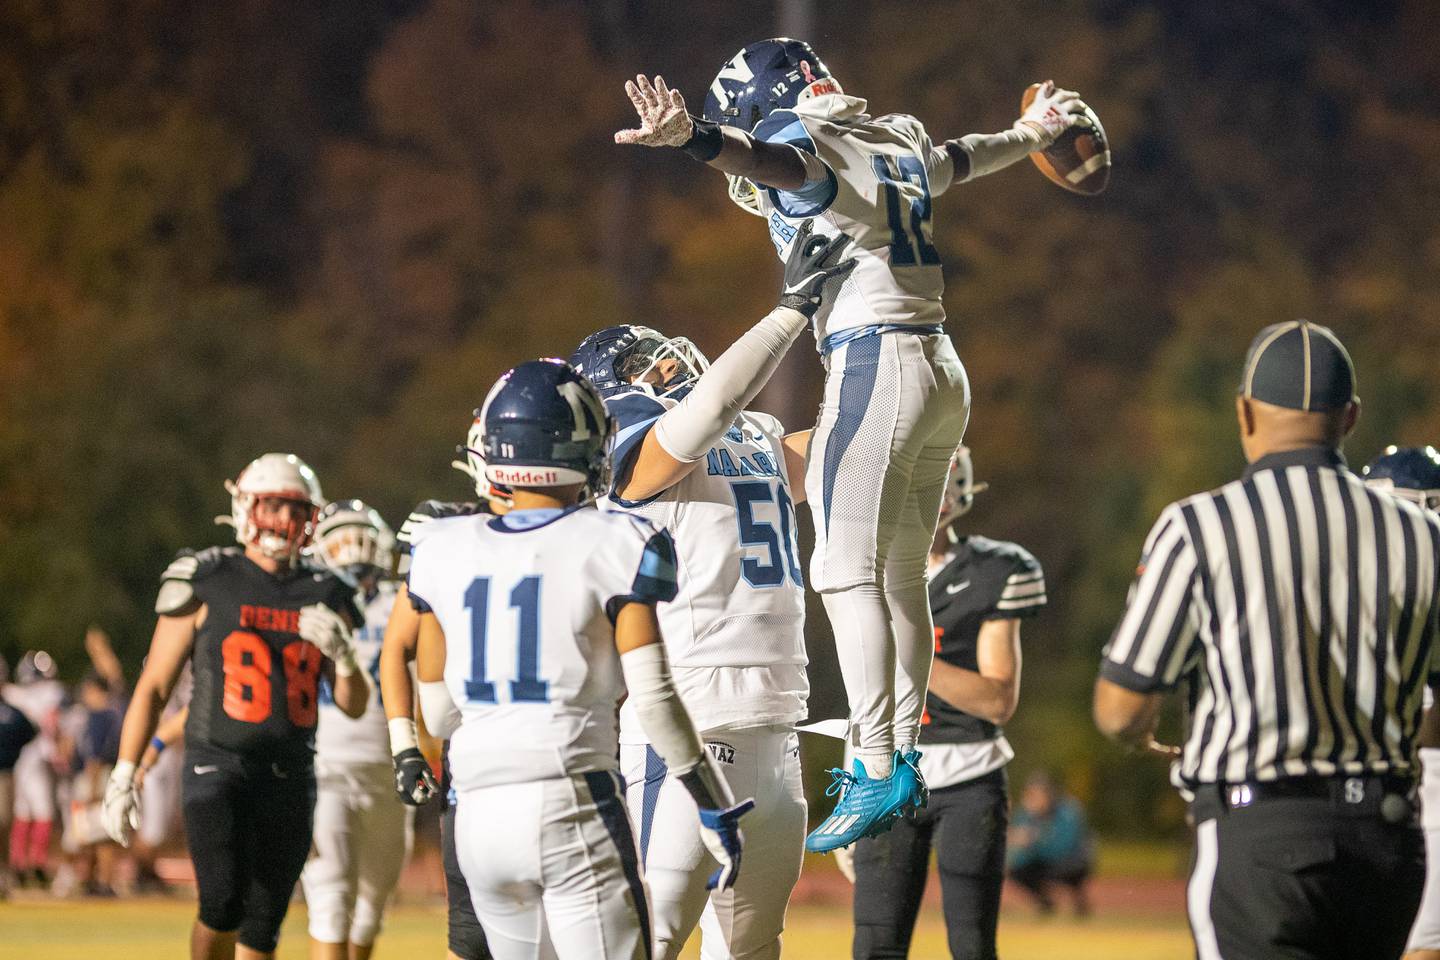 Nazareth Academy's Edward Mcclain Jr (12) is lifted up by William Beargie (50) after scoring a touchdown against Benet Academy during a football game at Benedictine University in Lisle on Friday, Oct 21, 2022.